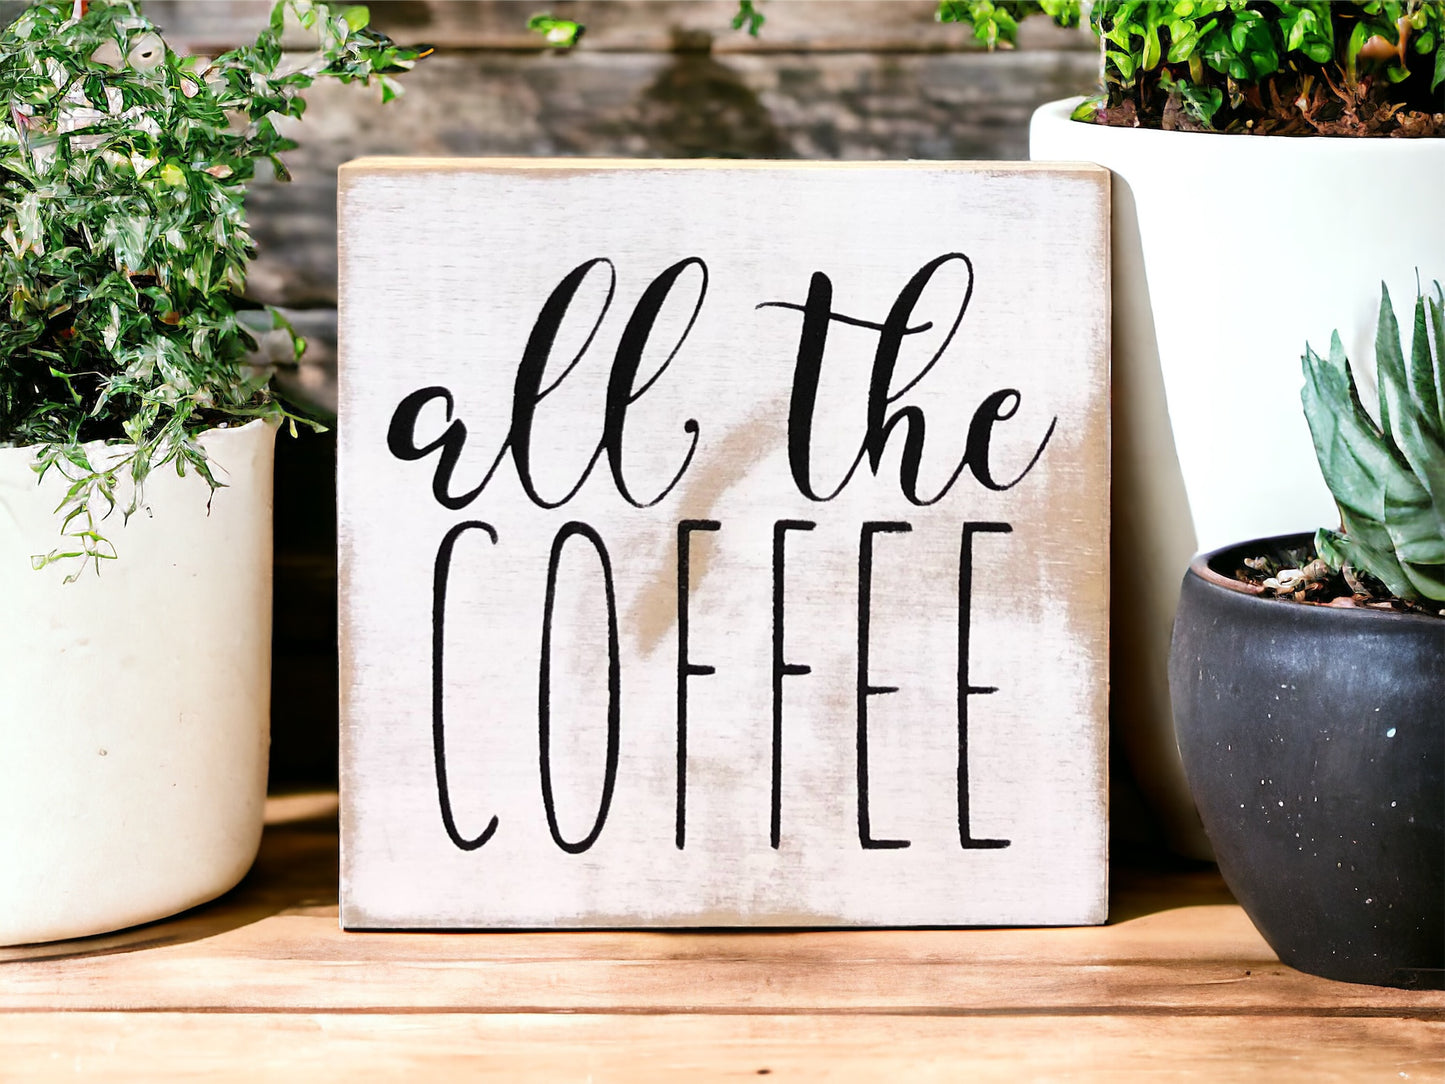 "All the coffee" wood sign